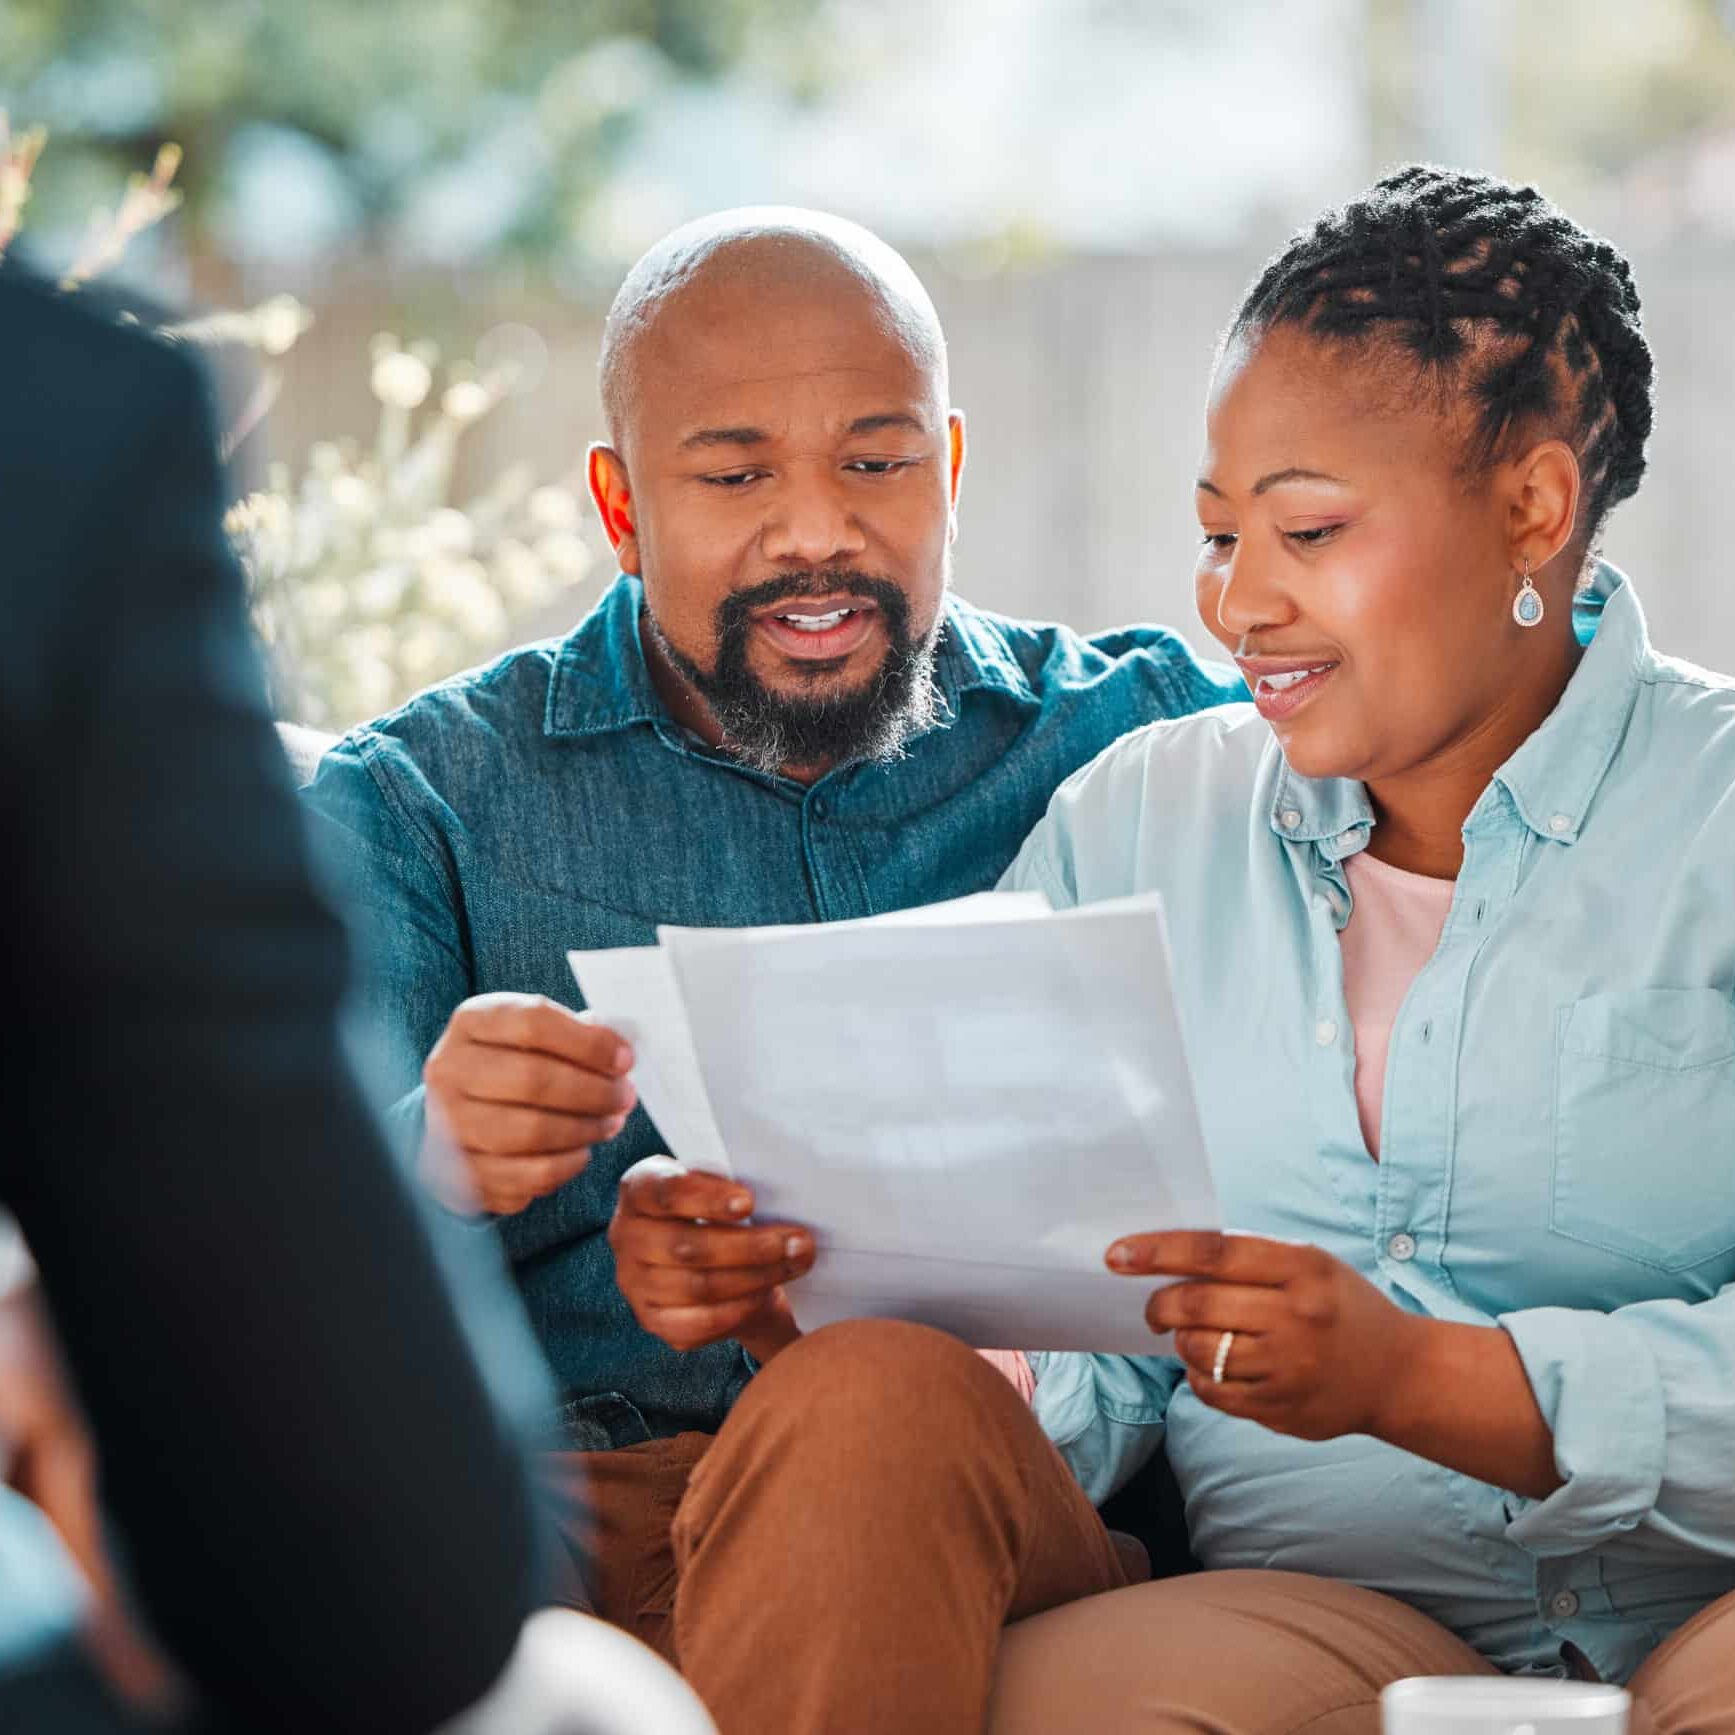 Happy couple, broker and contract in a house for a meeting or consultation for retirement advice. Financial advisor, black man and woman for investment, savings plan or pension and insurance paper.